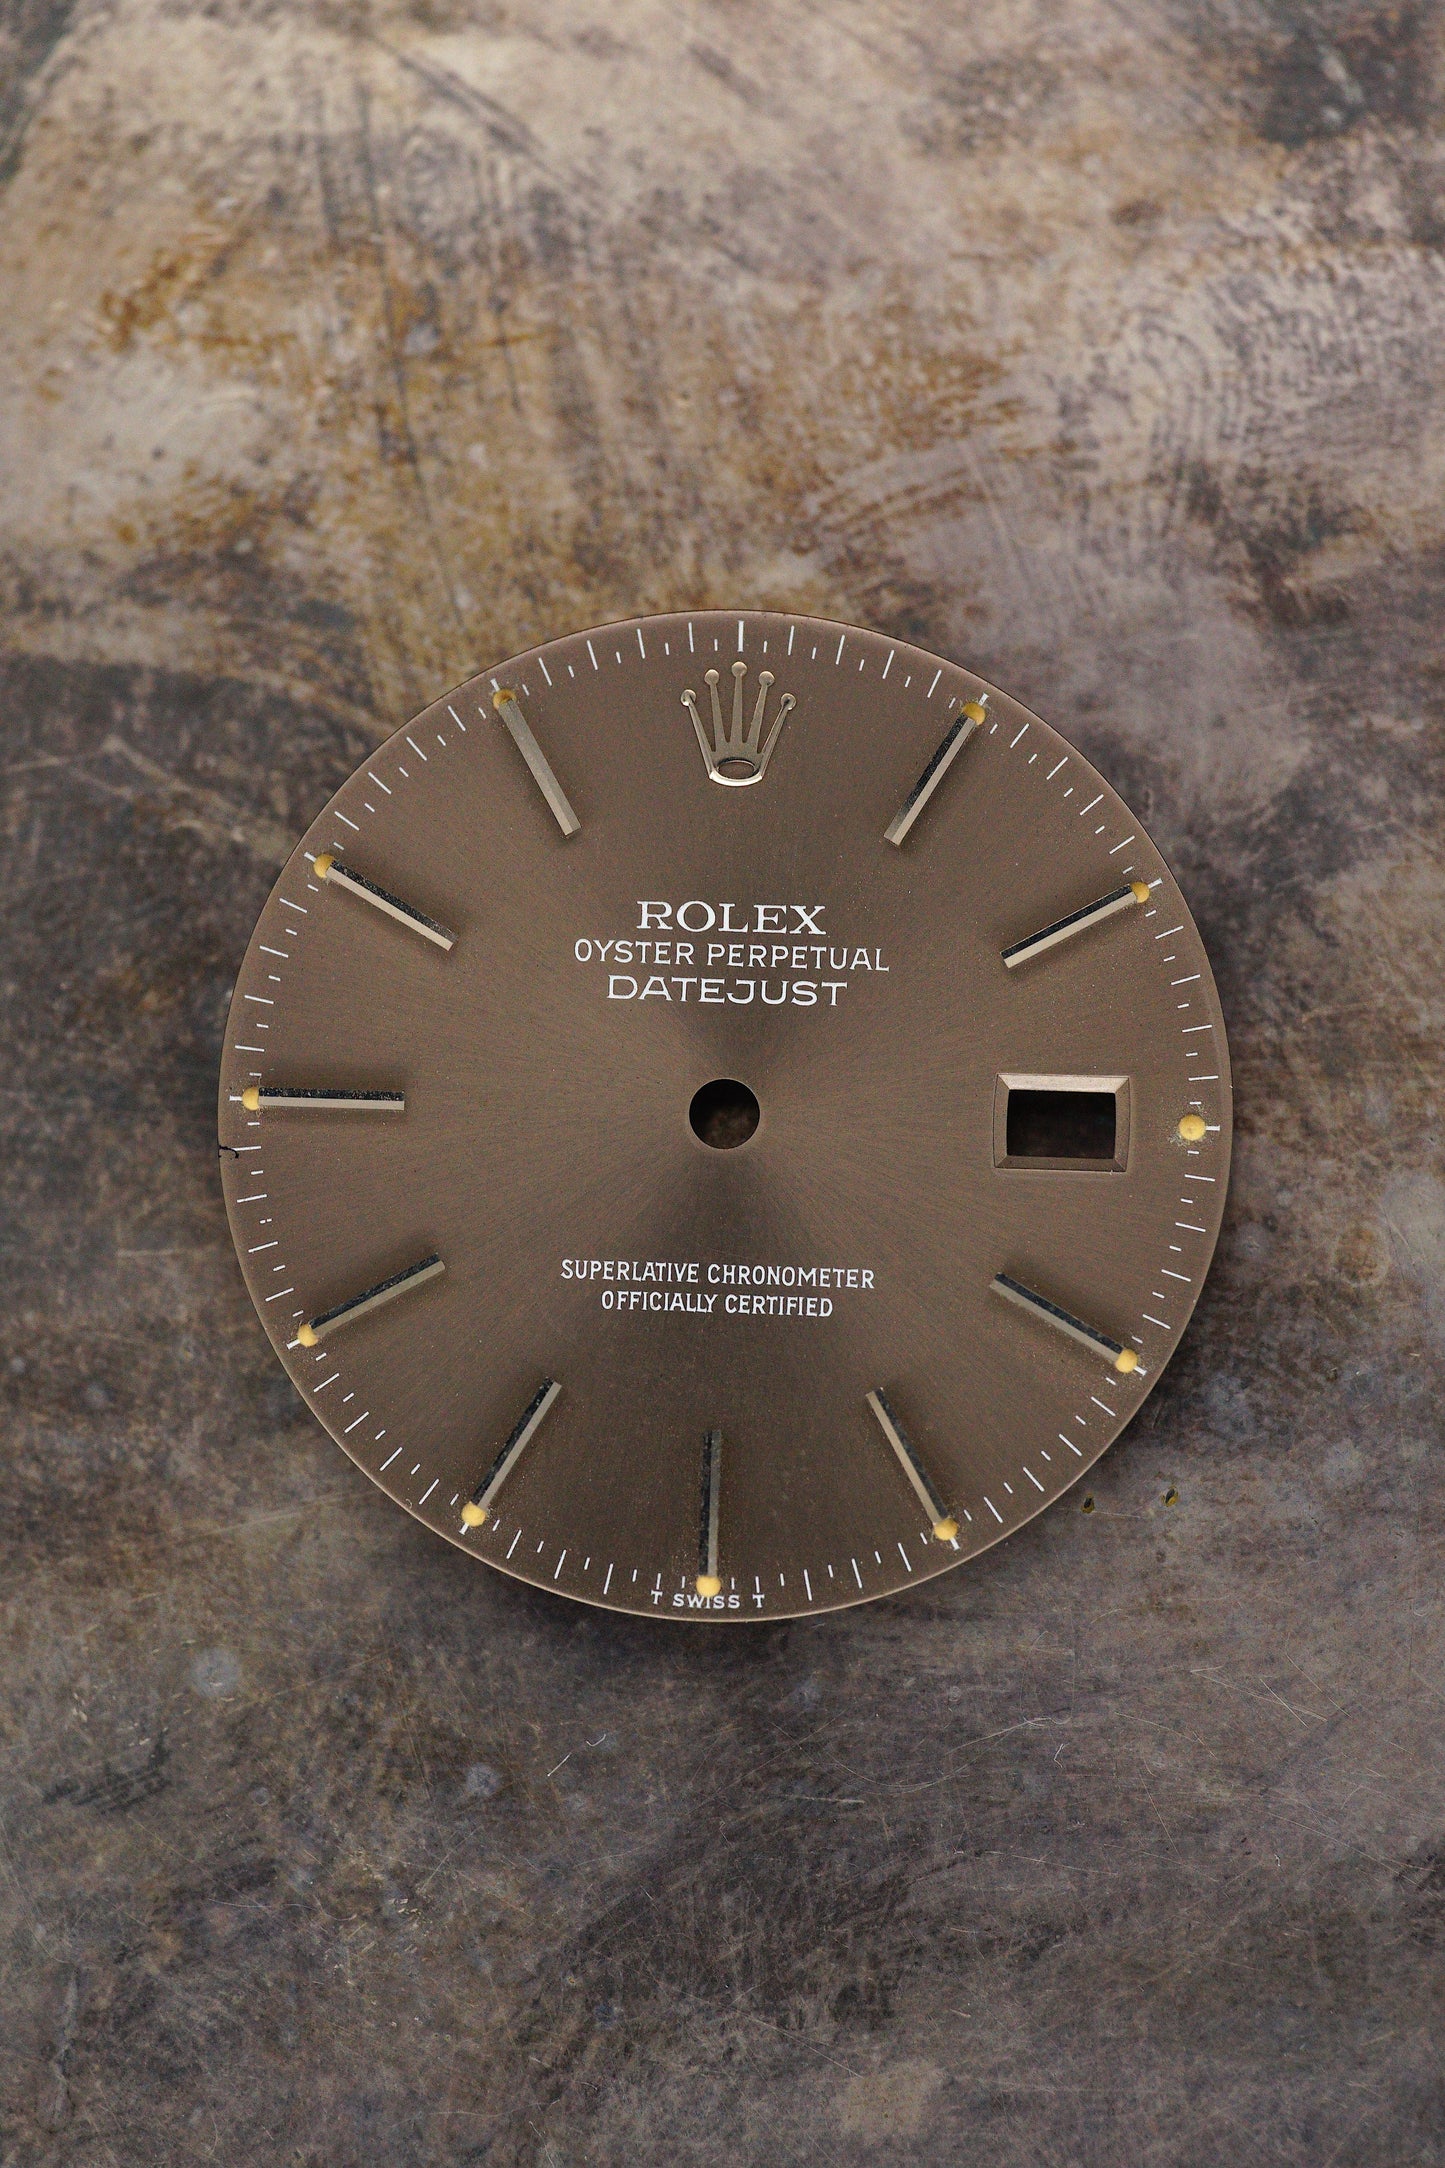 Rolex "Taupe Dial" for OP Datejust 36 mm 16234 |16030 | 16200 Tritium